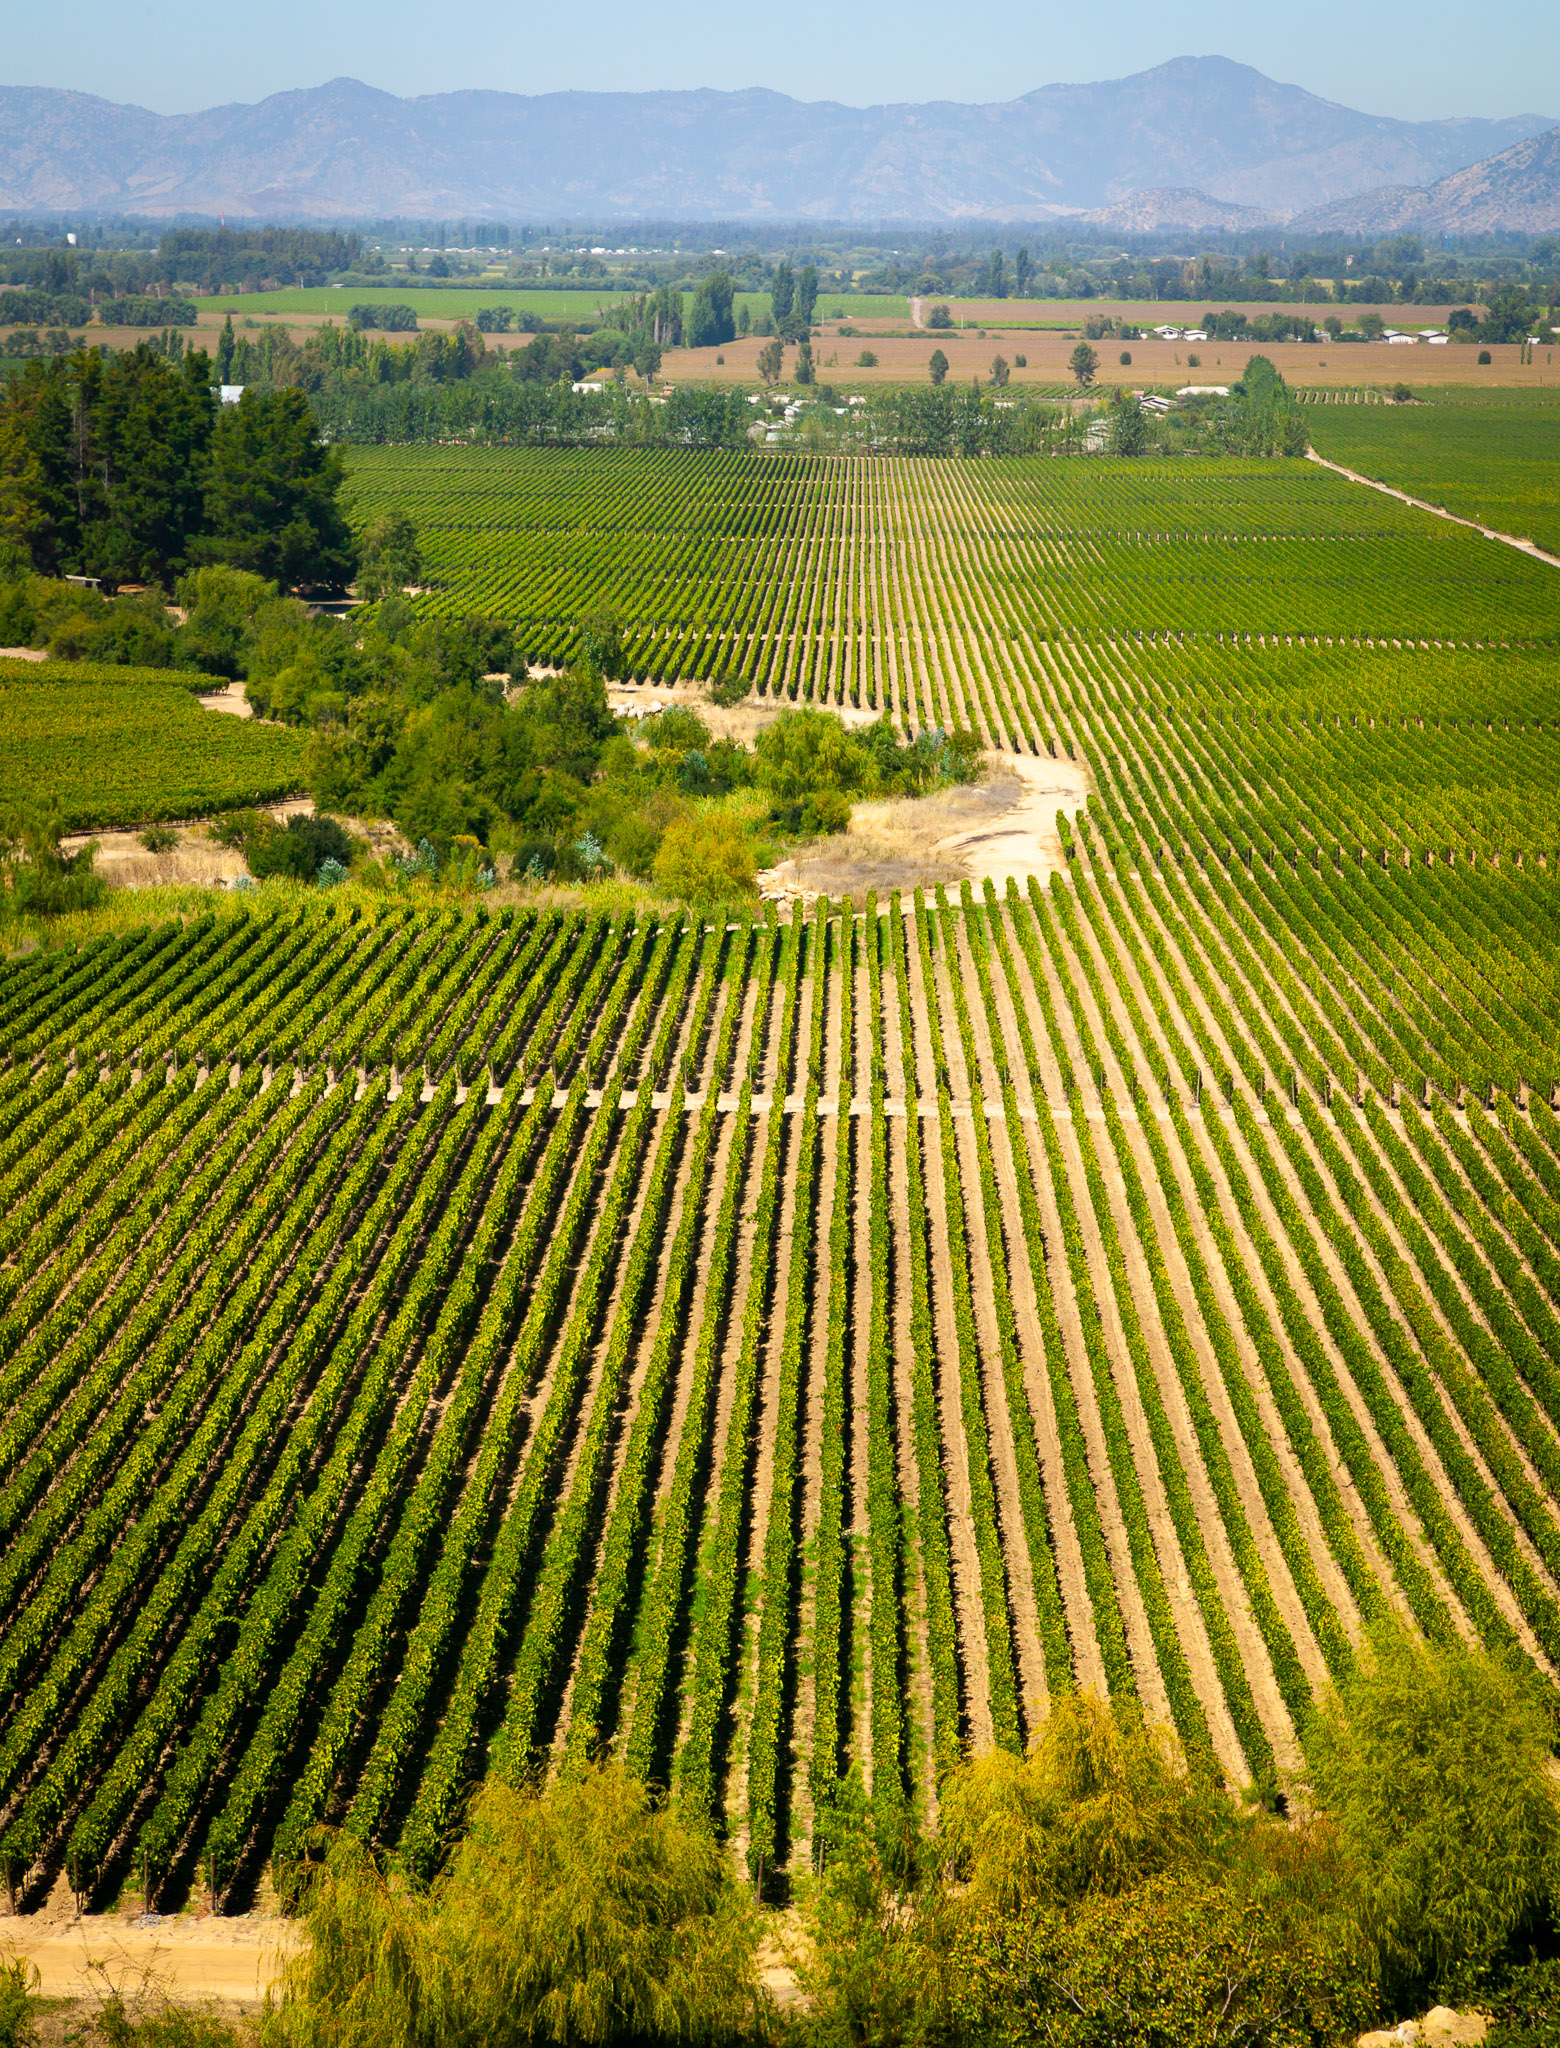 Just a hint of huge ocean of vineyards in the Colchagua Valley